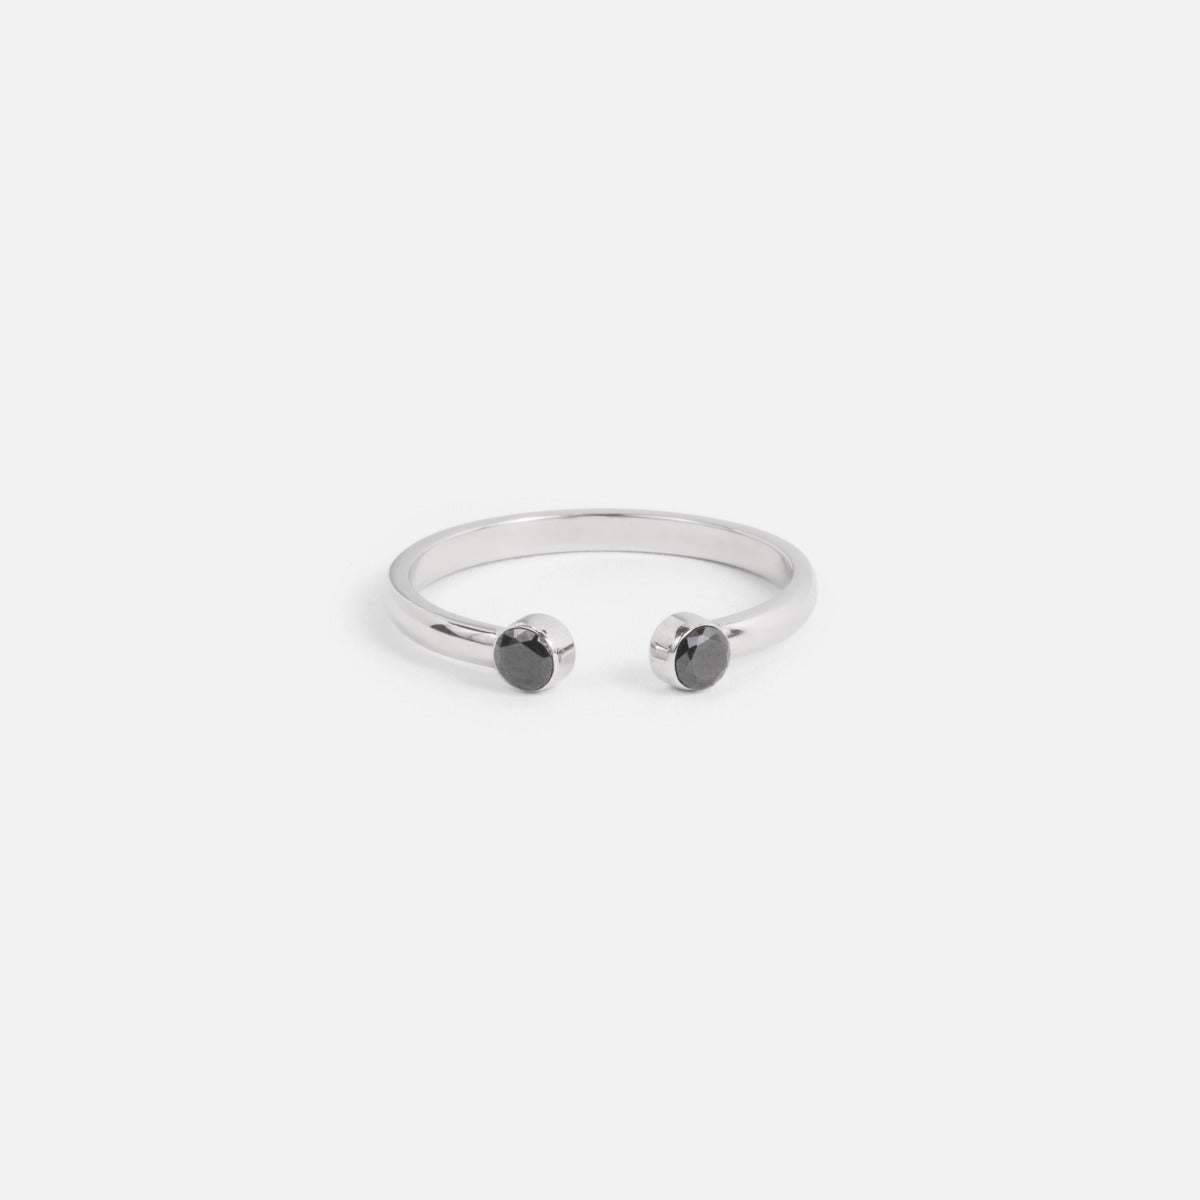 Stainless steel adjustable ring with two stones